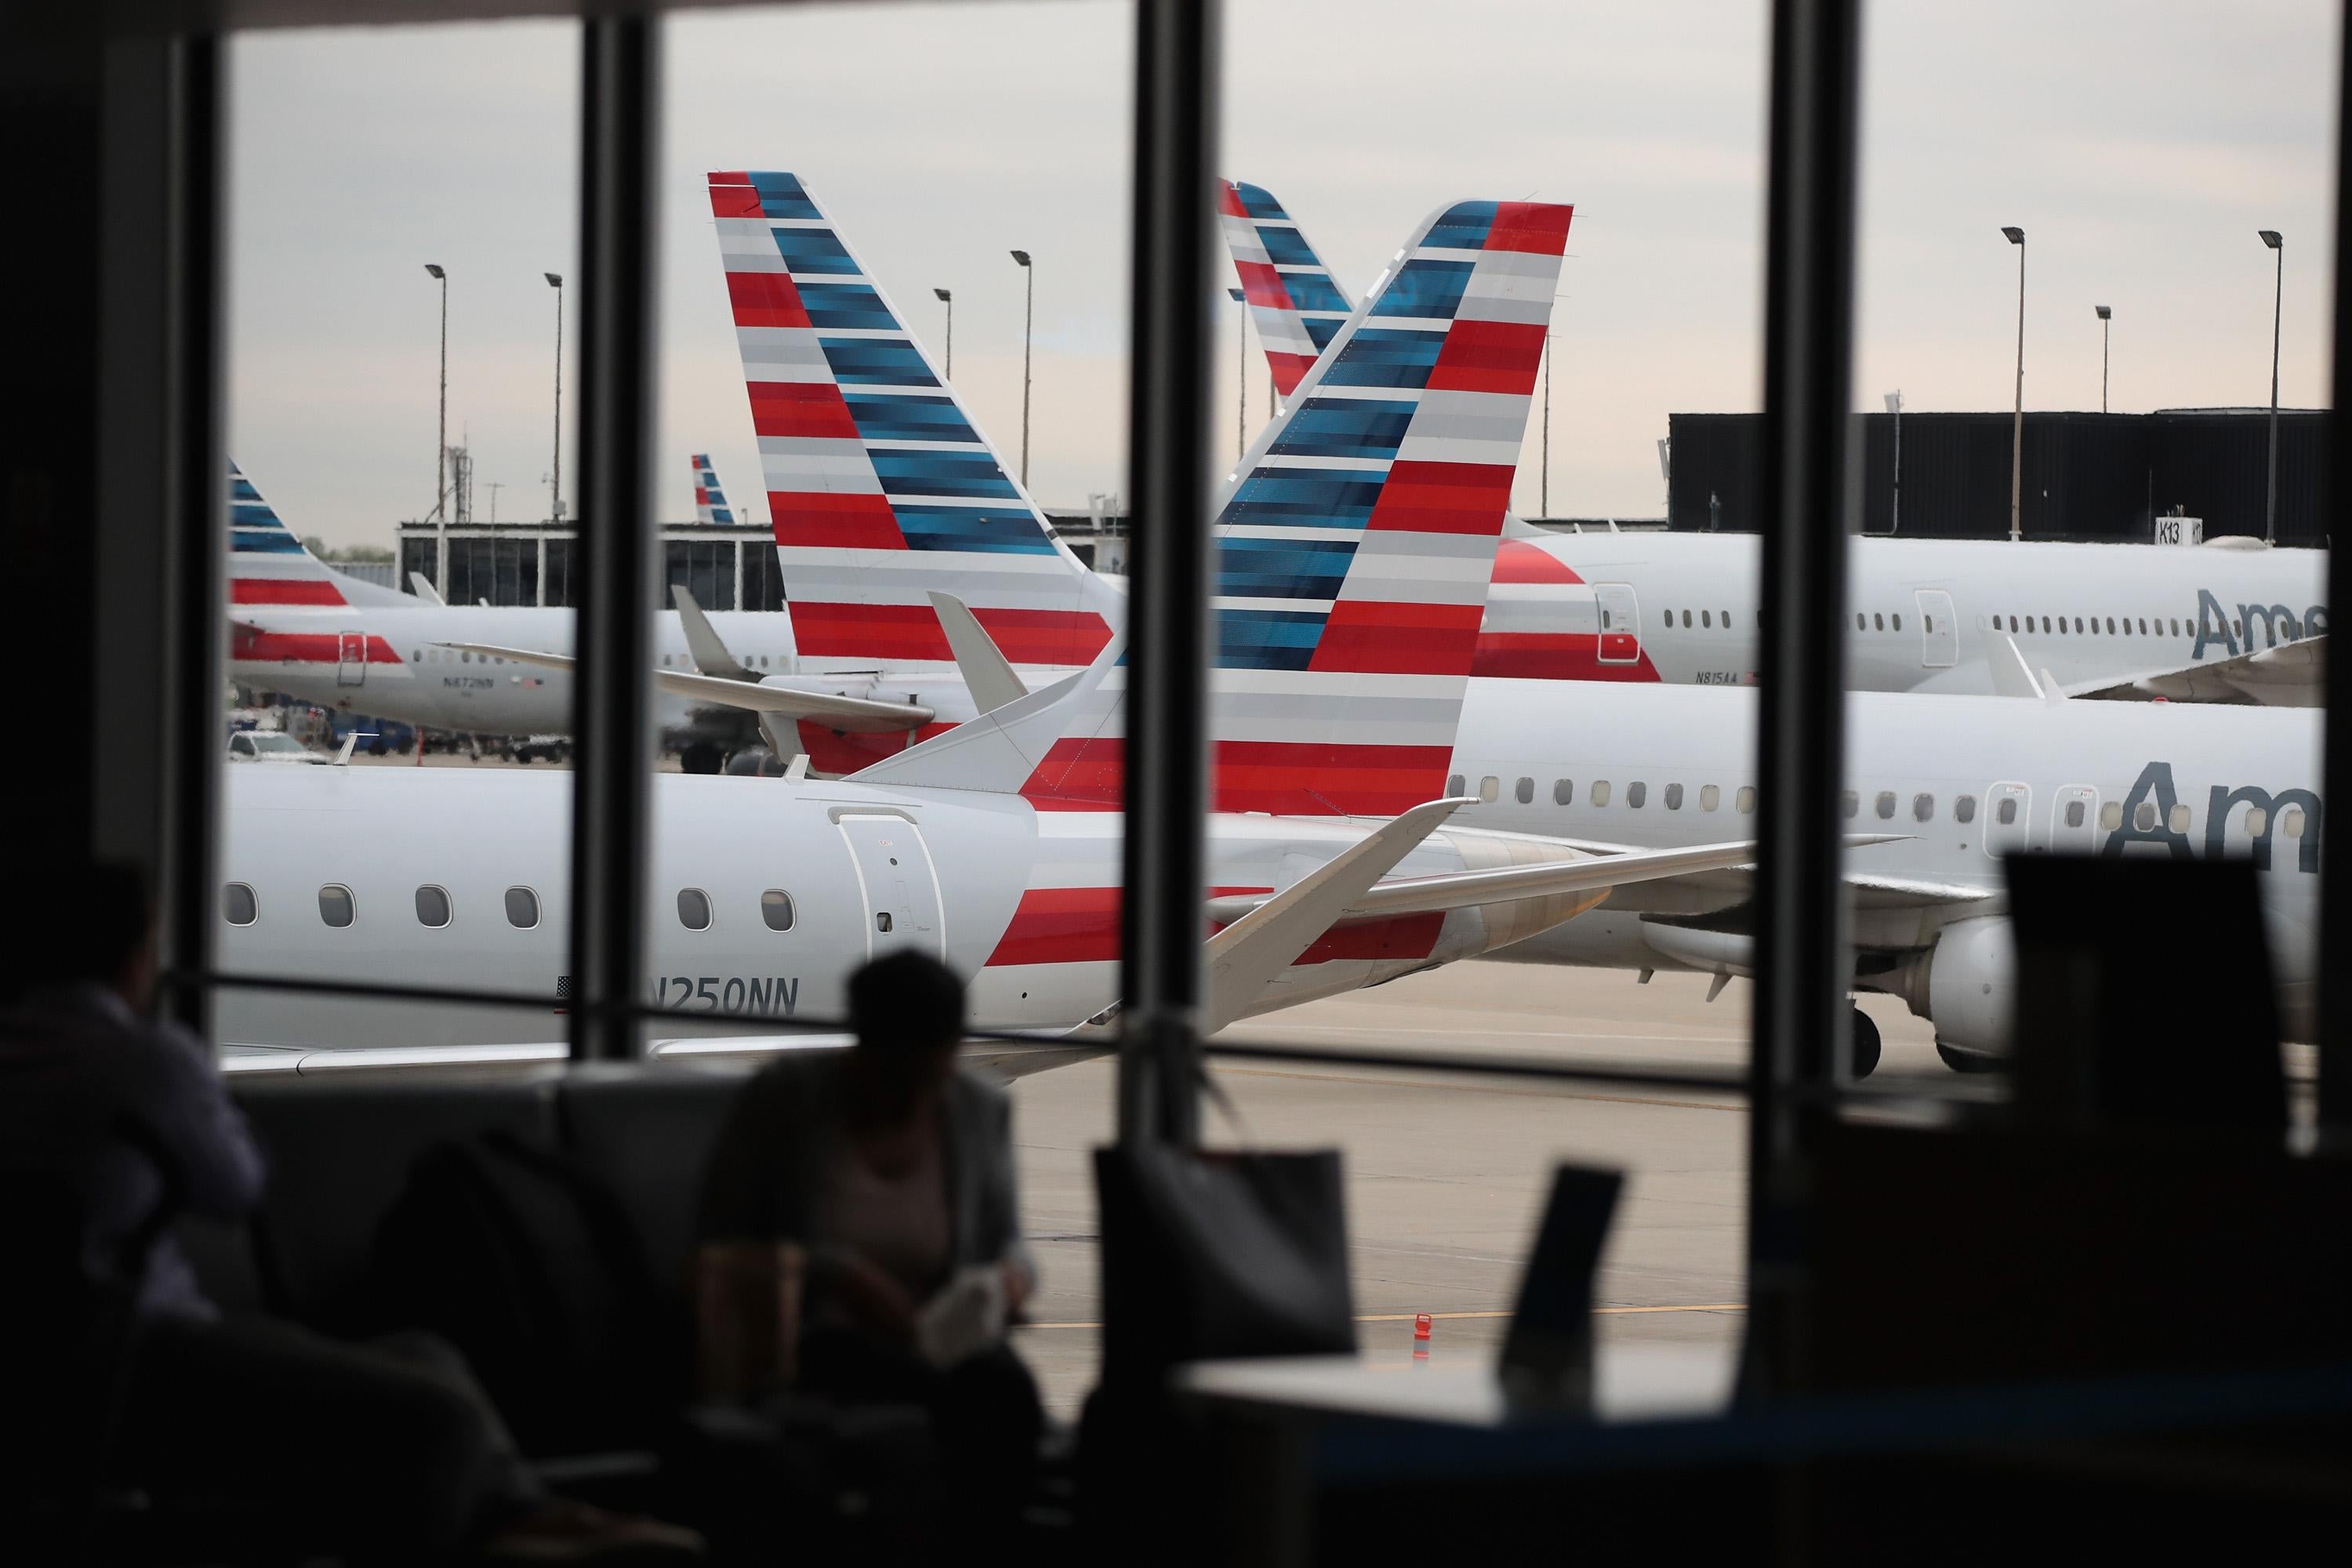 American Airlines aricraft sit at gates at O’Hare International Airport on May 11, 2018 in Chicago, Illinois. 